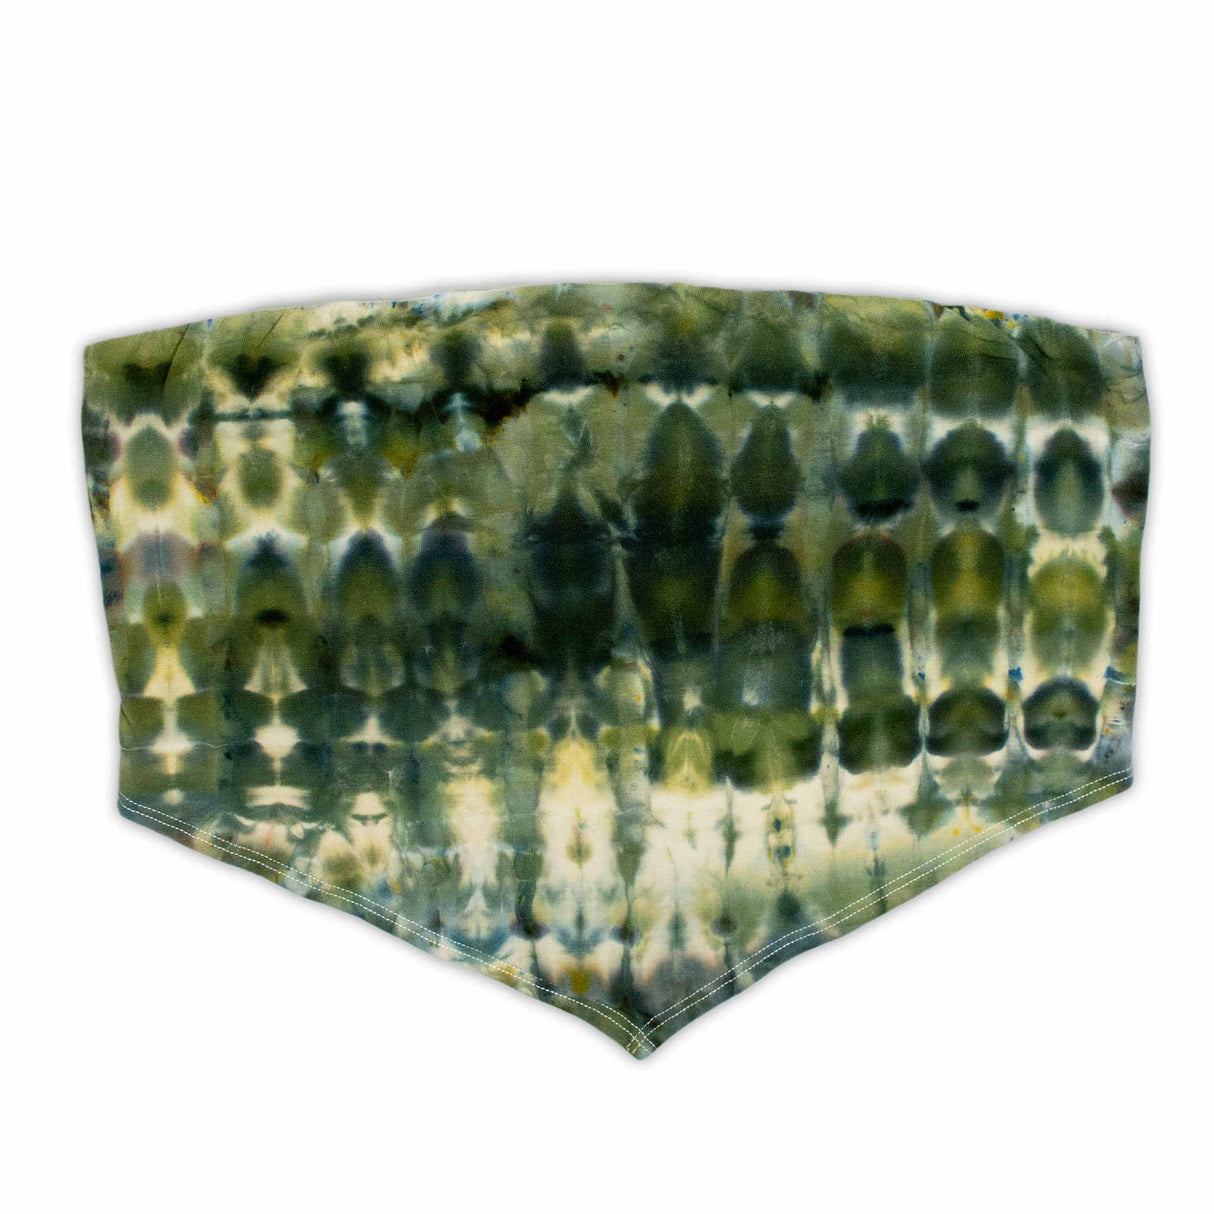 This bandeau top showcases the art of ice dyeing with its intricate pattern of emerald and sage green, accented by streaks of sand..